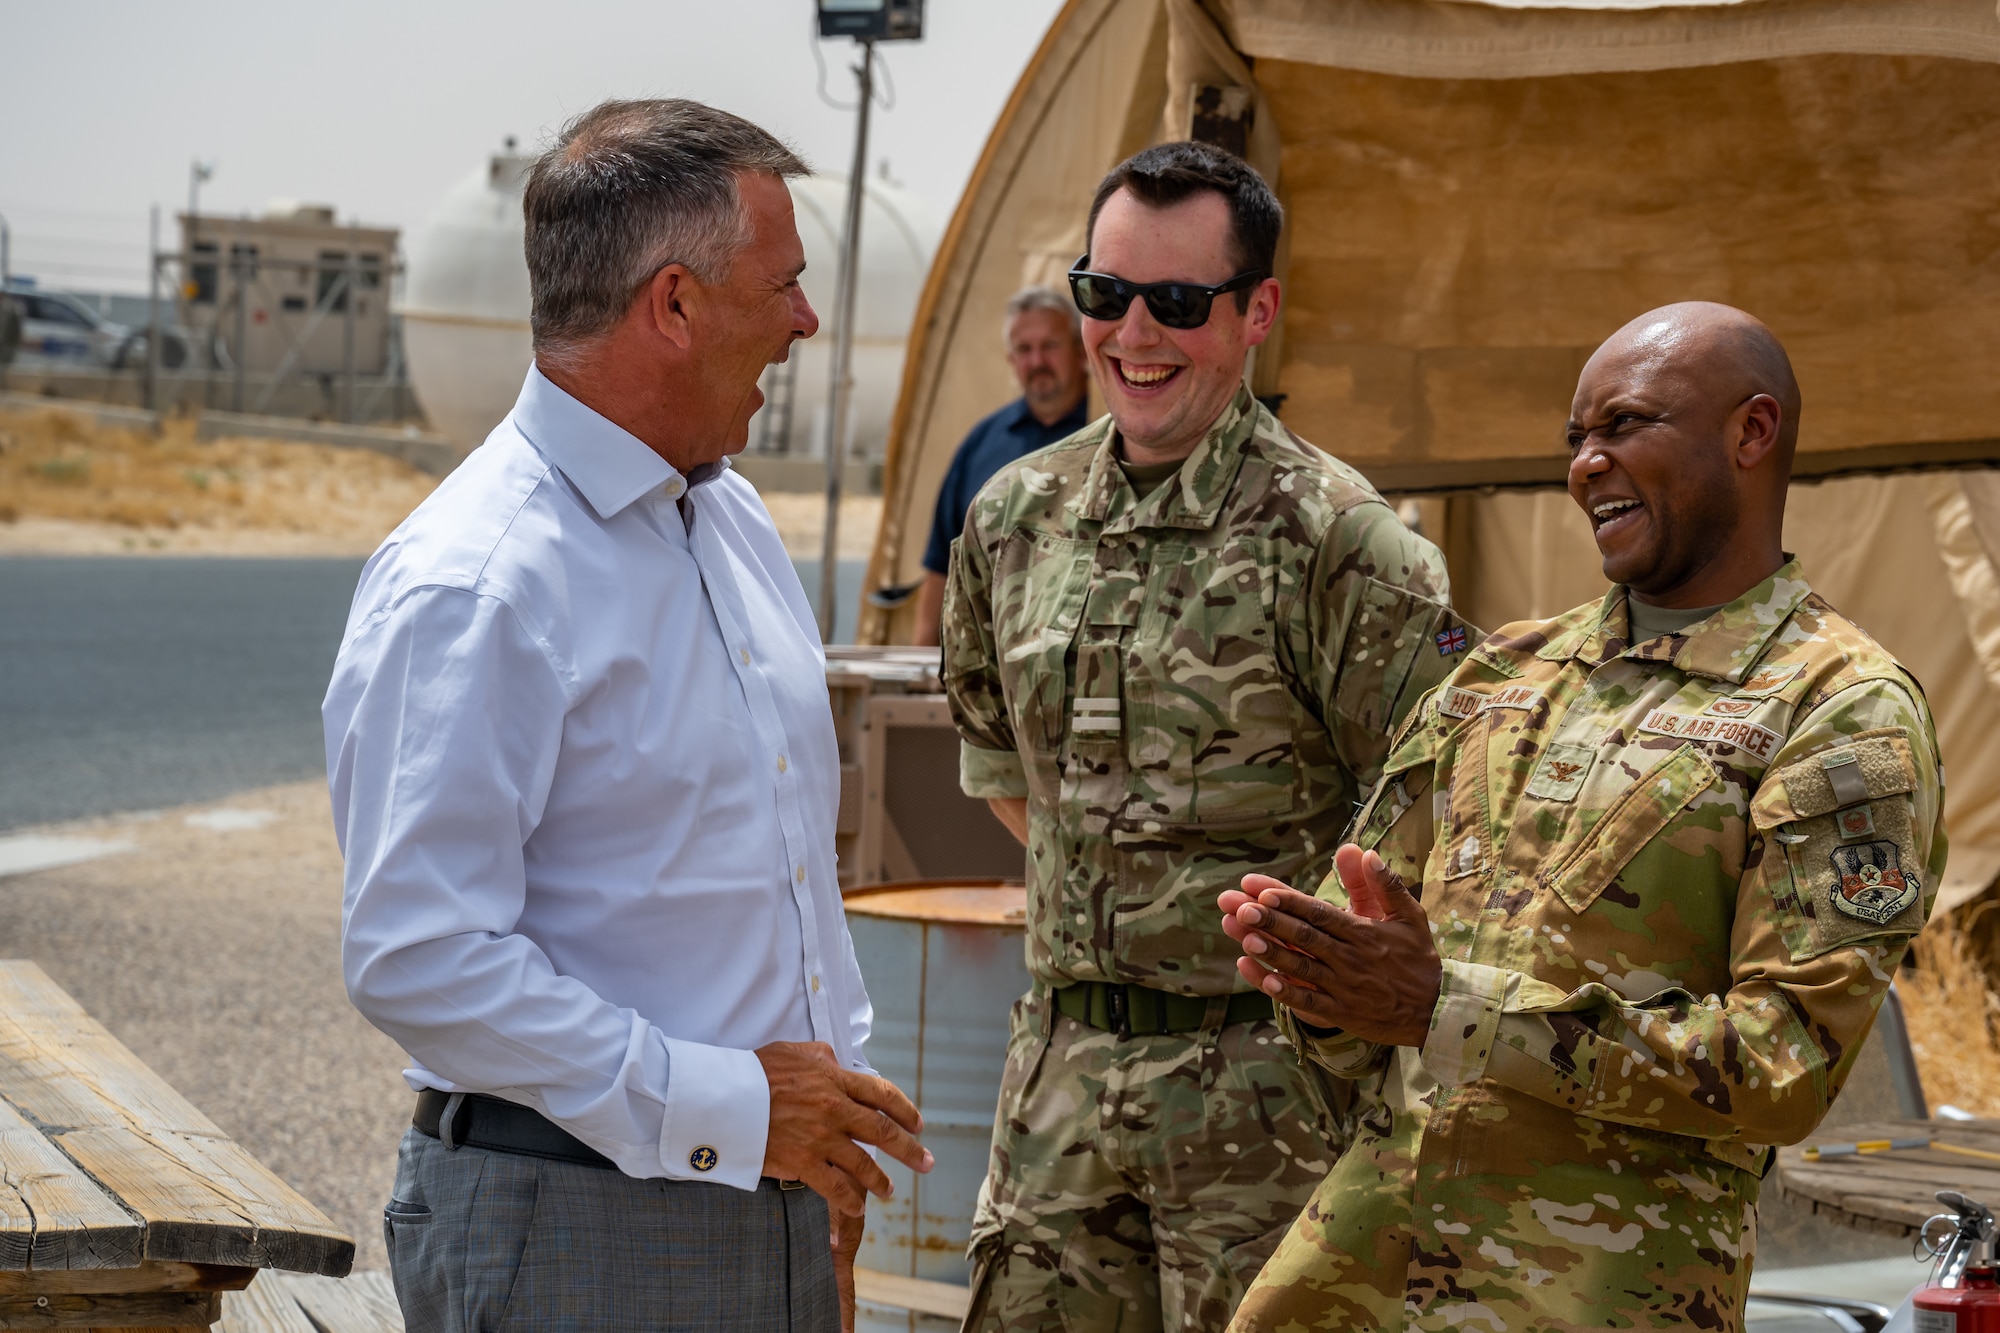 From left, Lord Mark Lancaster, United Kingdom Government’s Defence Export Advocate, Royal Air Force Flight Lieutenant Nicholas Lloyd, and U.S. Air Force Col. Damion Holtzclaw, 386th Air Expeditionary Wing deputy commander, meet during a tour of the installation at Ali Al Salem Air Base, Kuwait, July 4, 2023. A group of U.K. leaders traveled to Kuwait to foster the working relationship between the U.K. and their Kuwaiti partners, and the visit also provided the opportunity for the U.S. to further the connection with our coalition partners on a strategic level. (U.S. Air Force photo by Staff Sgt. Kevin Long)